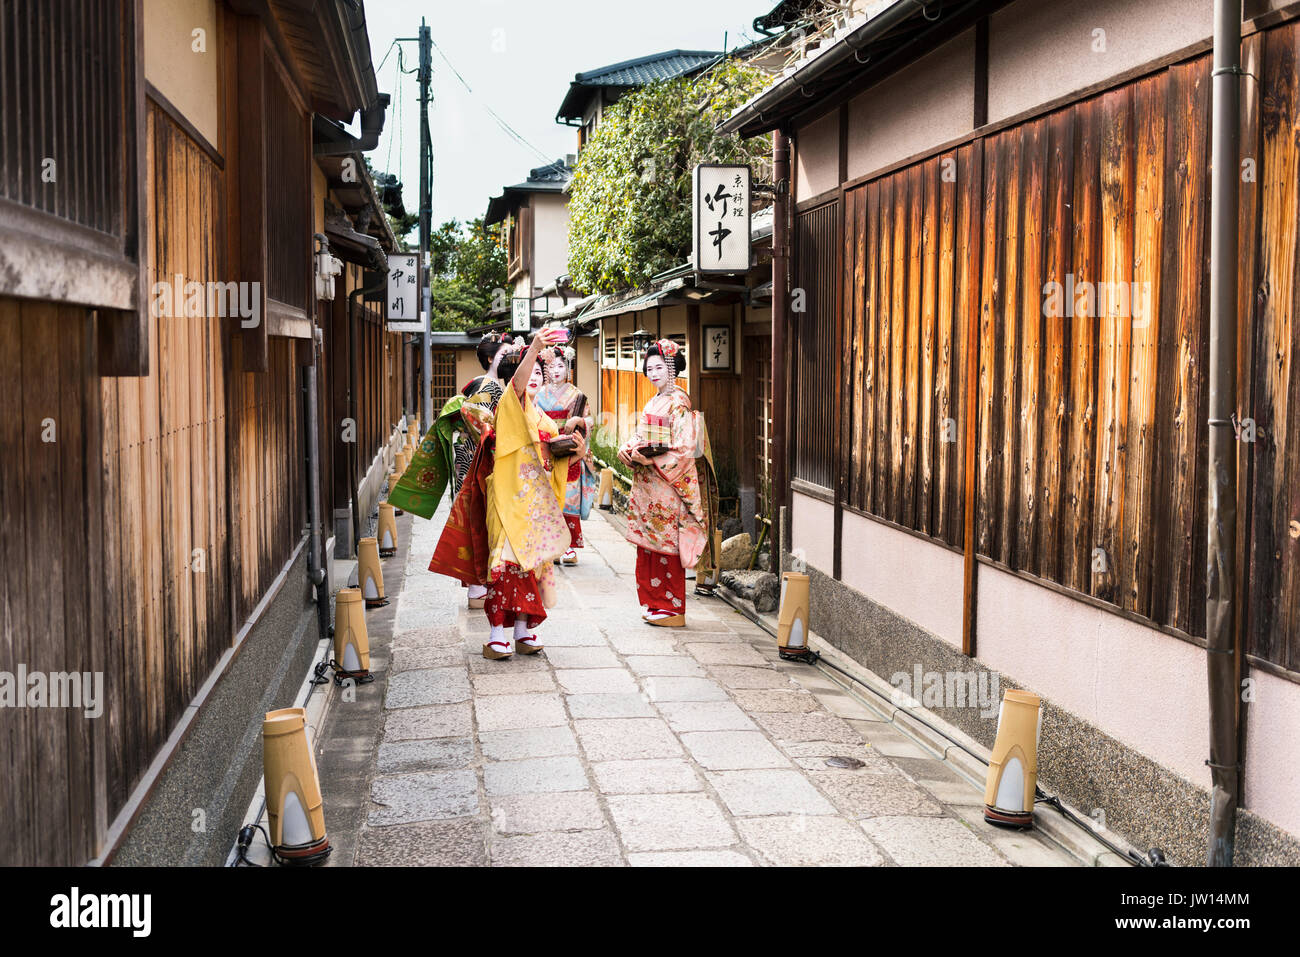 Group of four Geisha taking a selfie in a traditional Kyoto street in Japan Stock Photo